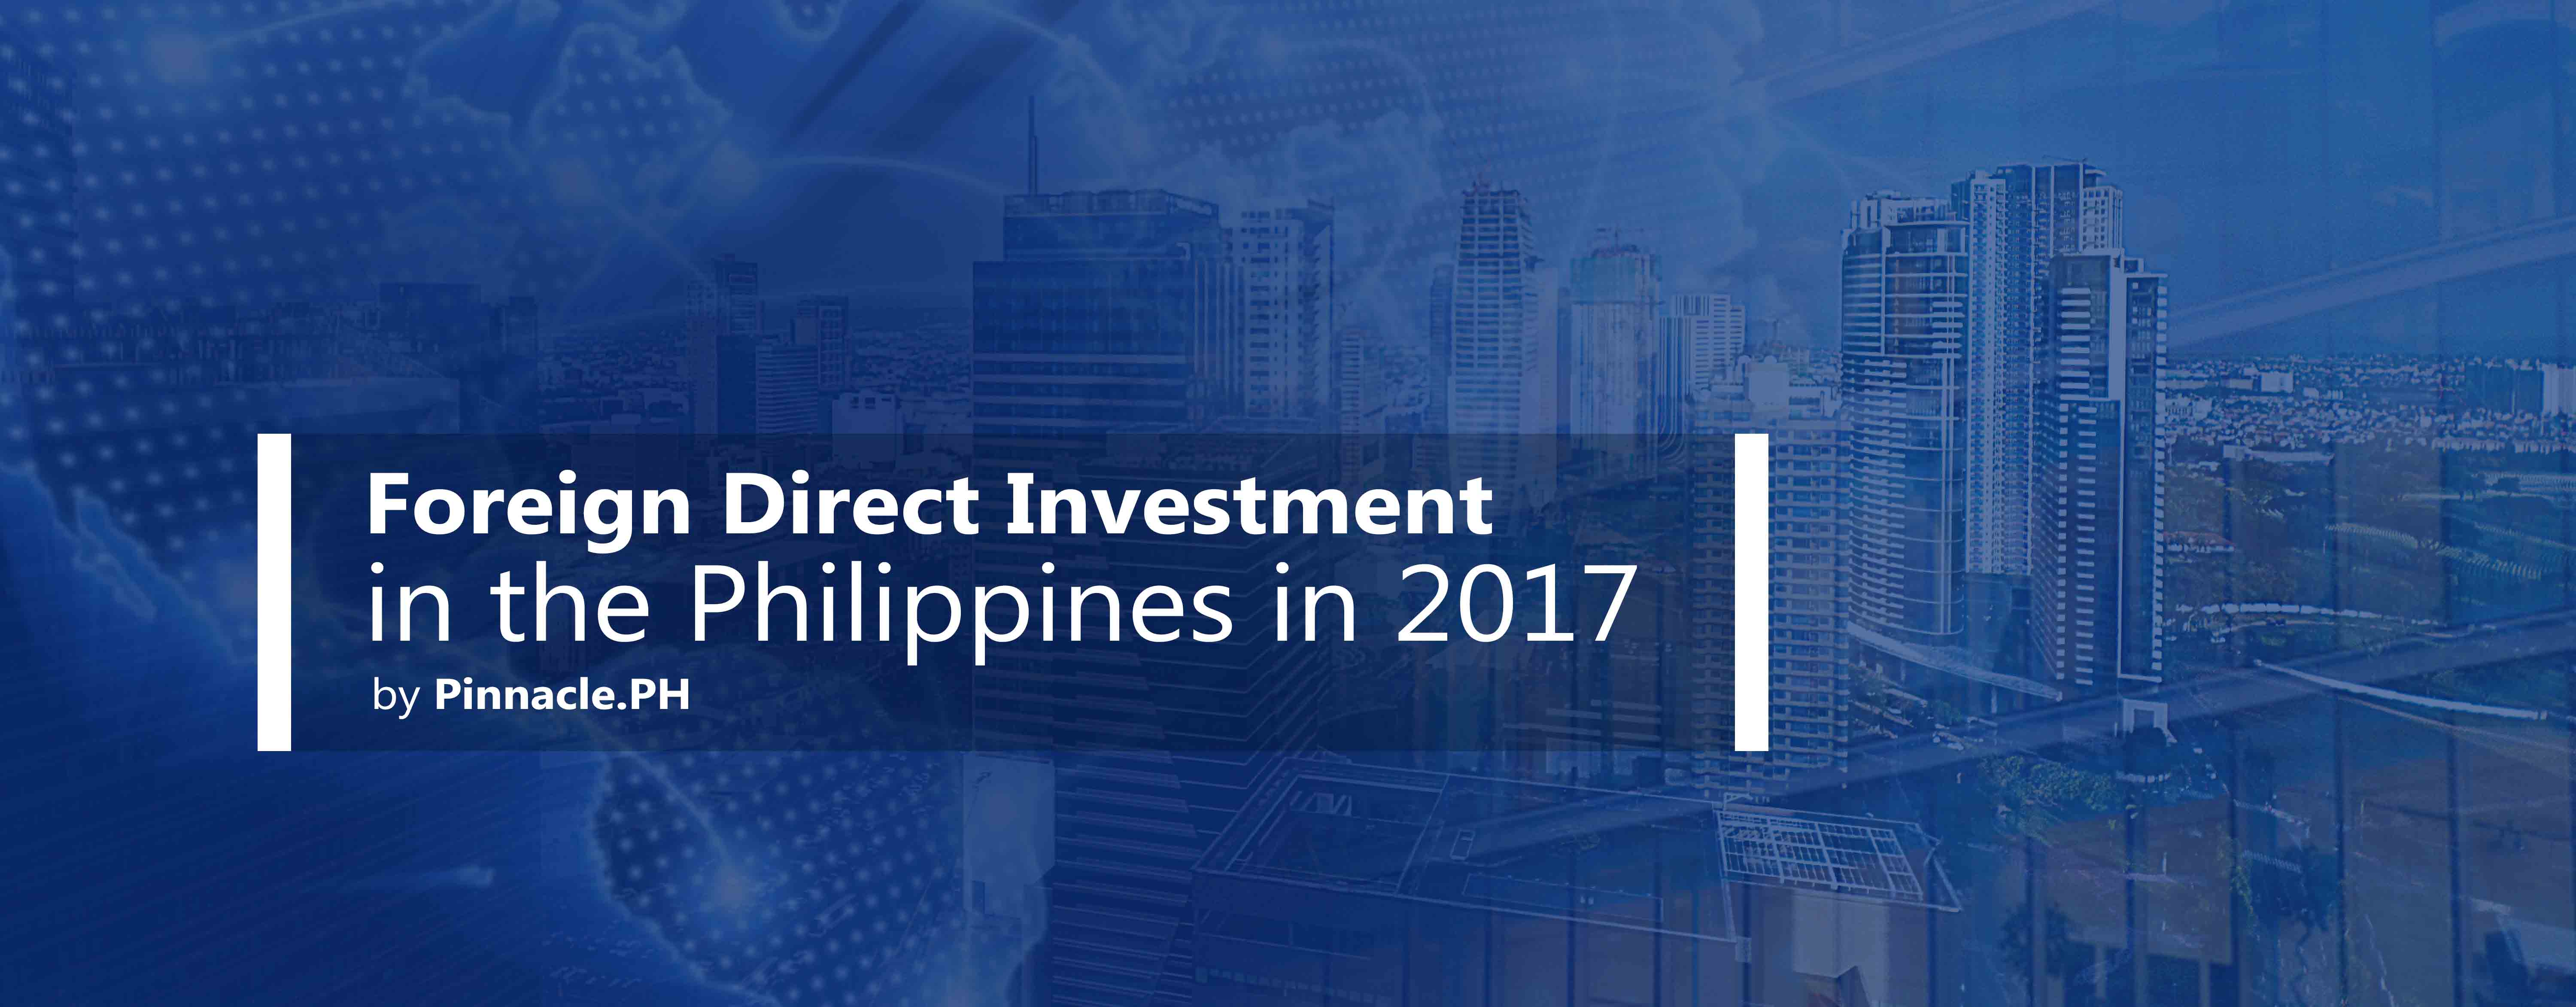 Foreign Direct Investment in the Philippines in 2017